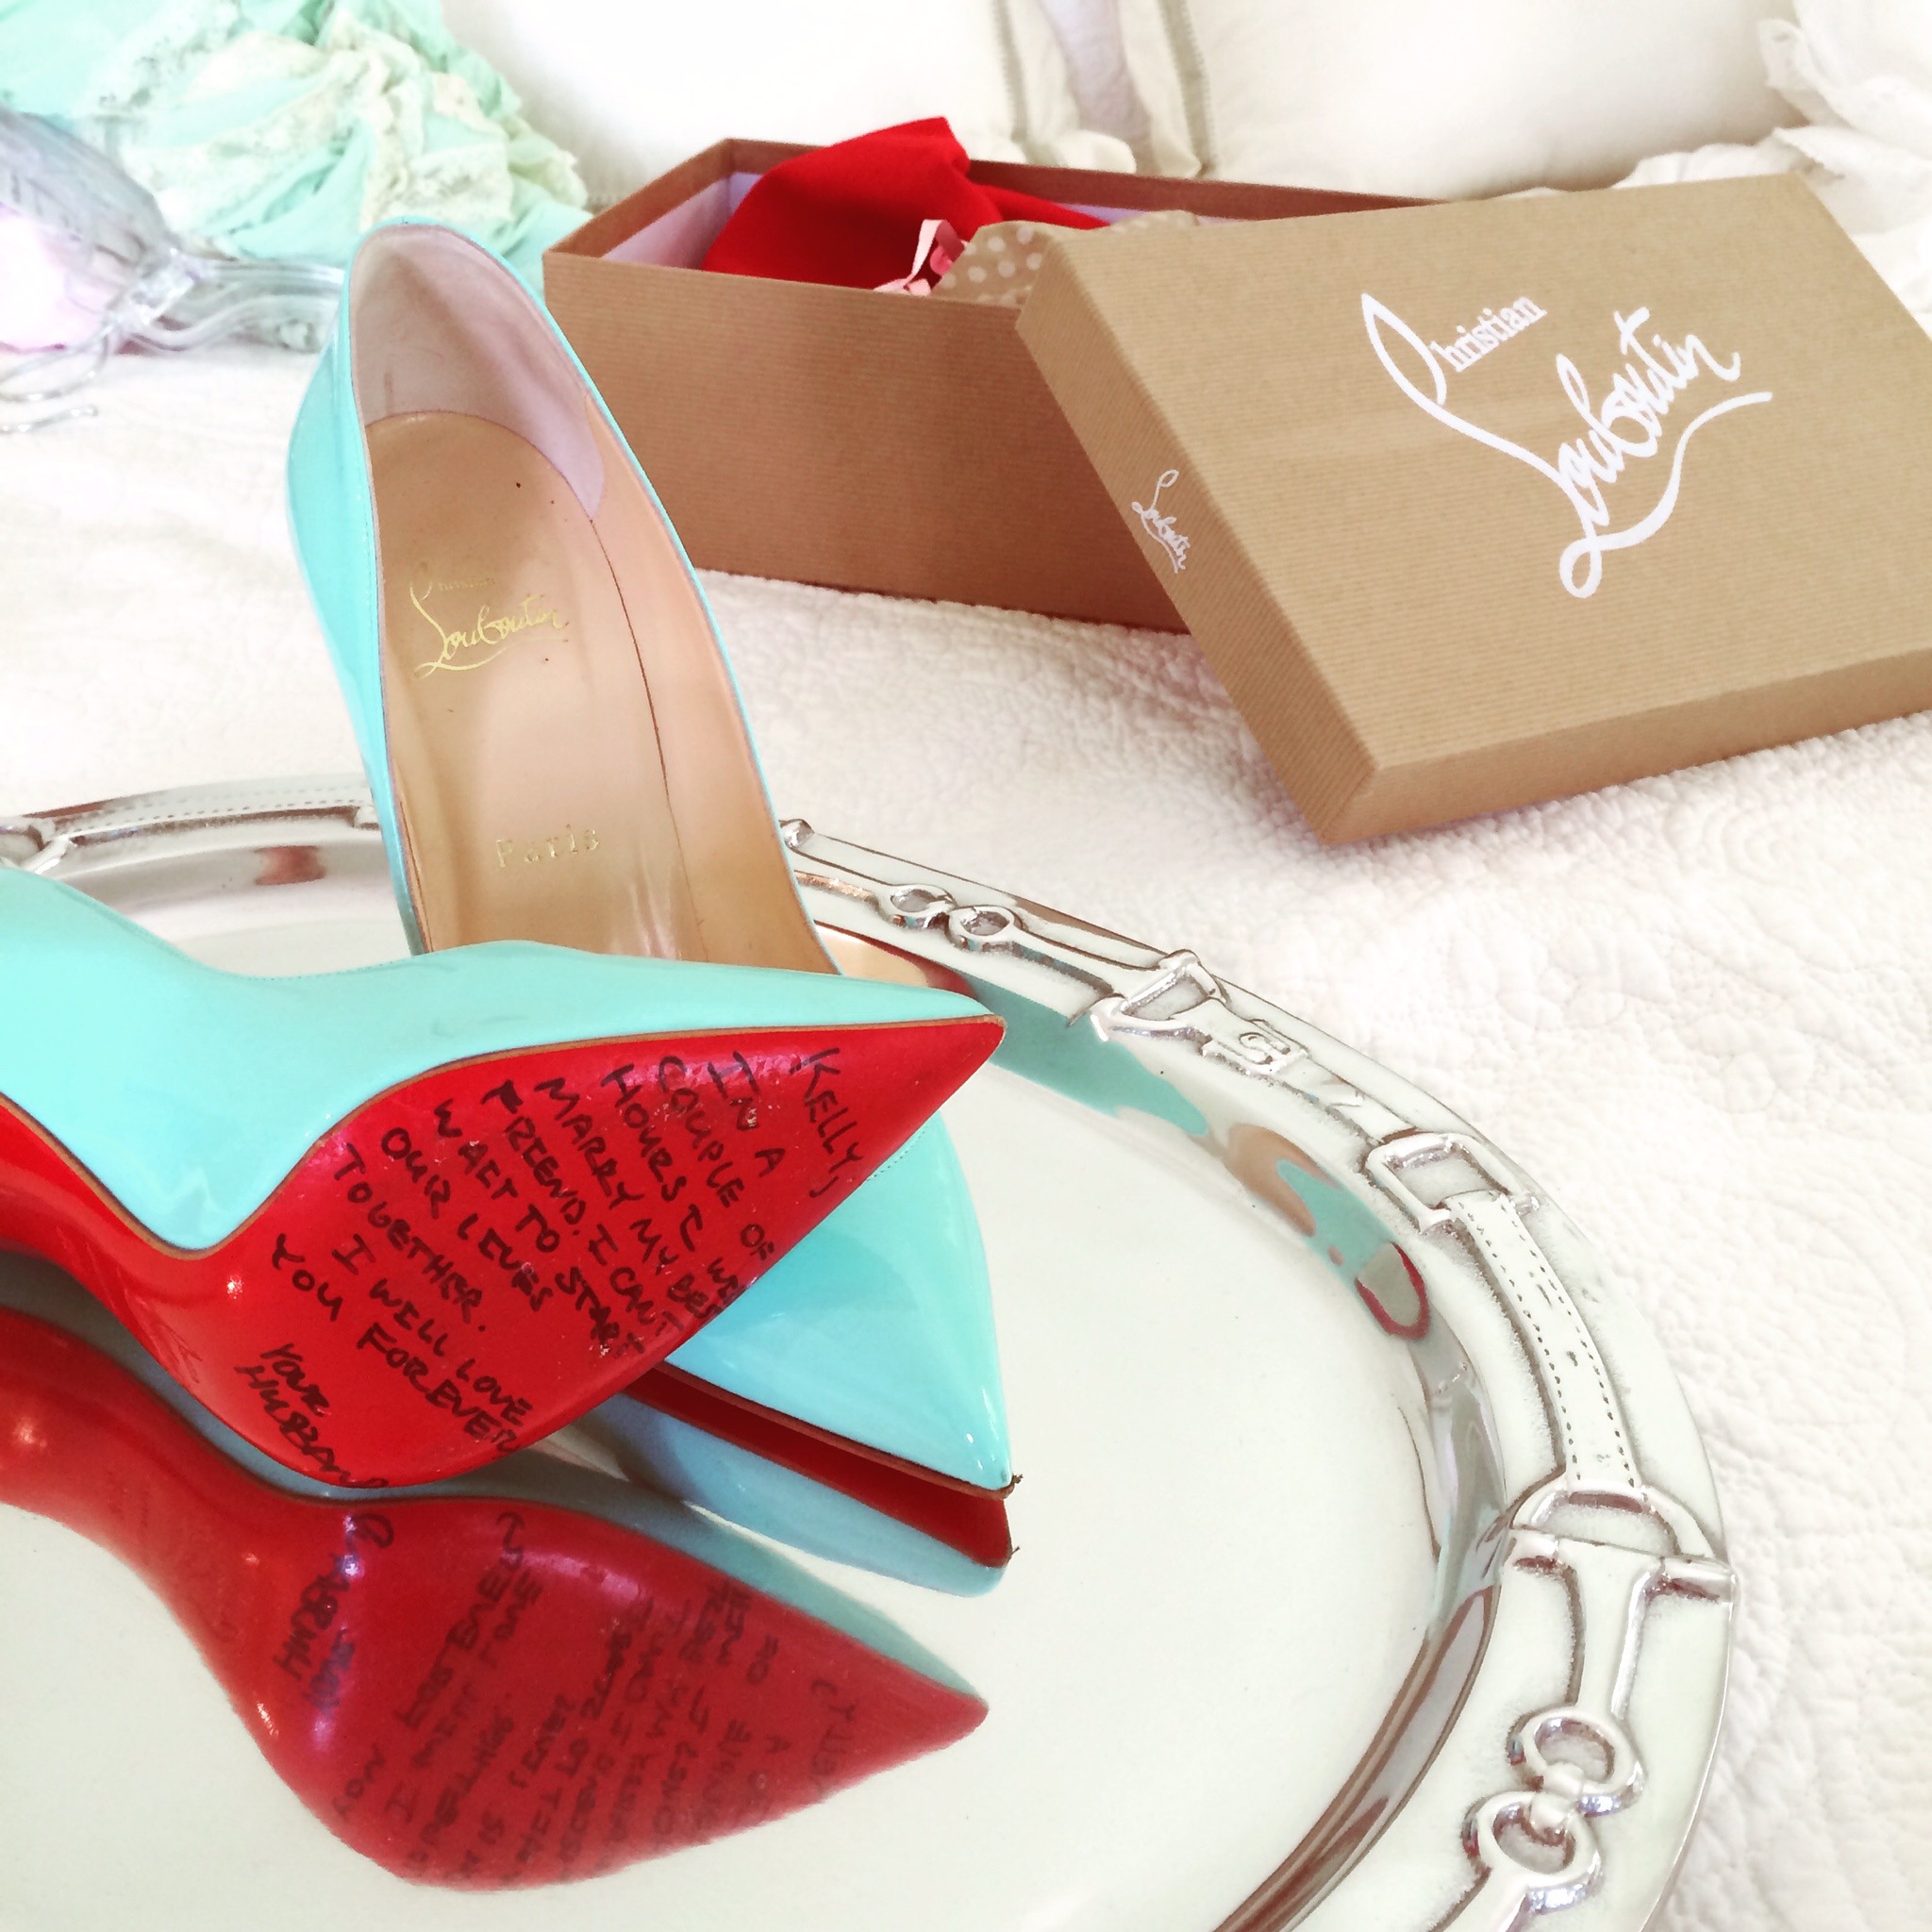 Christian Louboutin Wedding Shoes, Love Letter from Groom, Blue Wedding Shoes